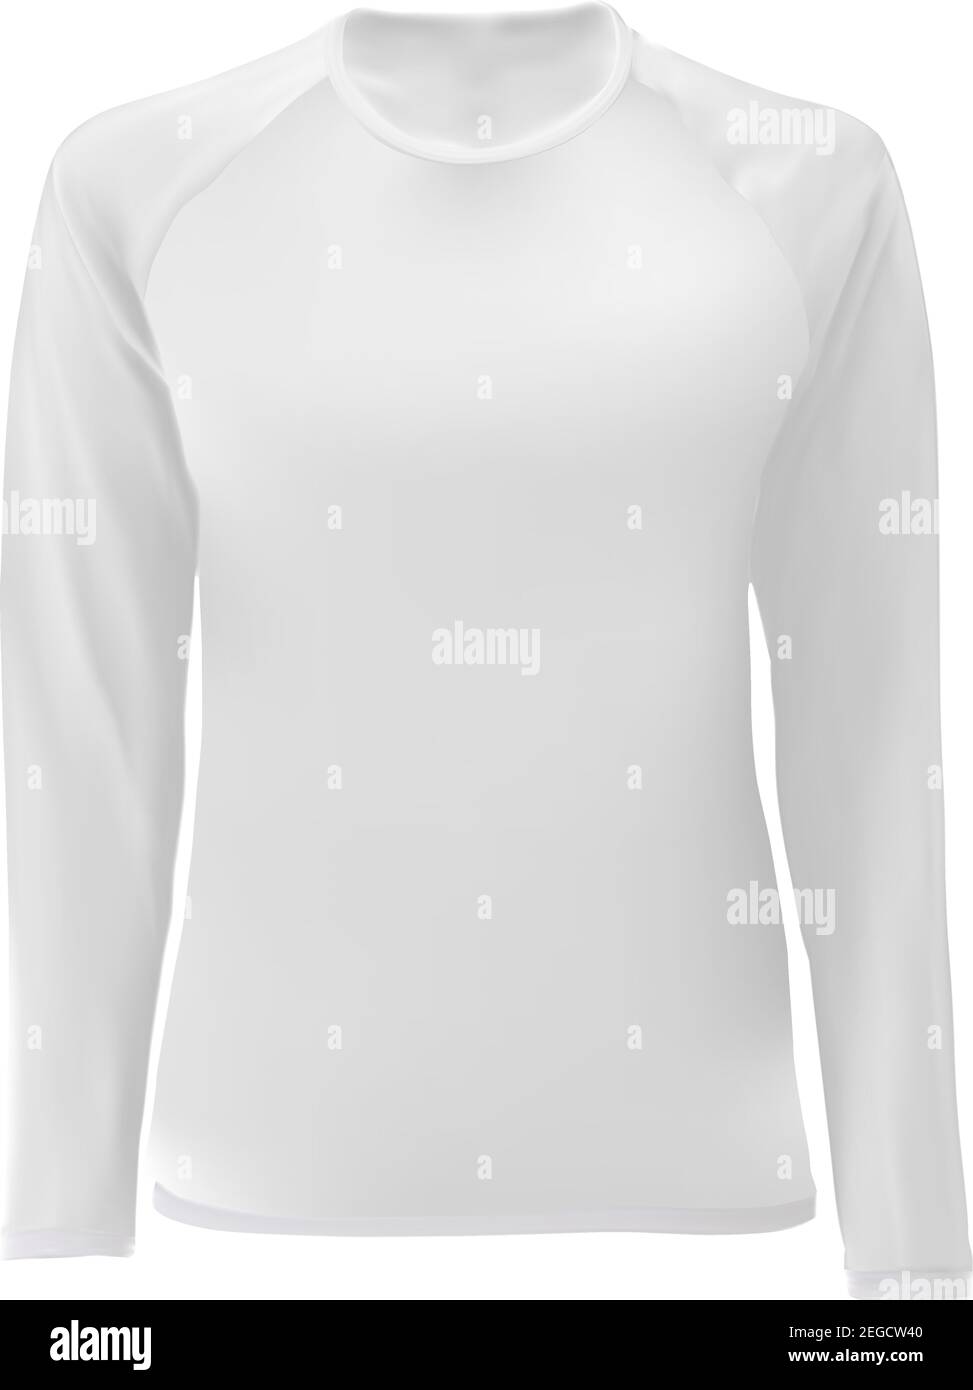 38,000+ White Long Sleeve T Shirt Pictures